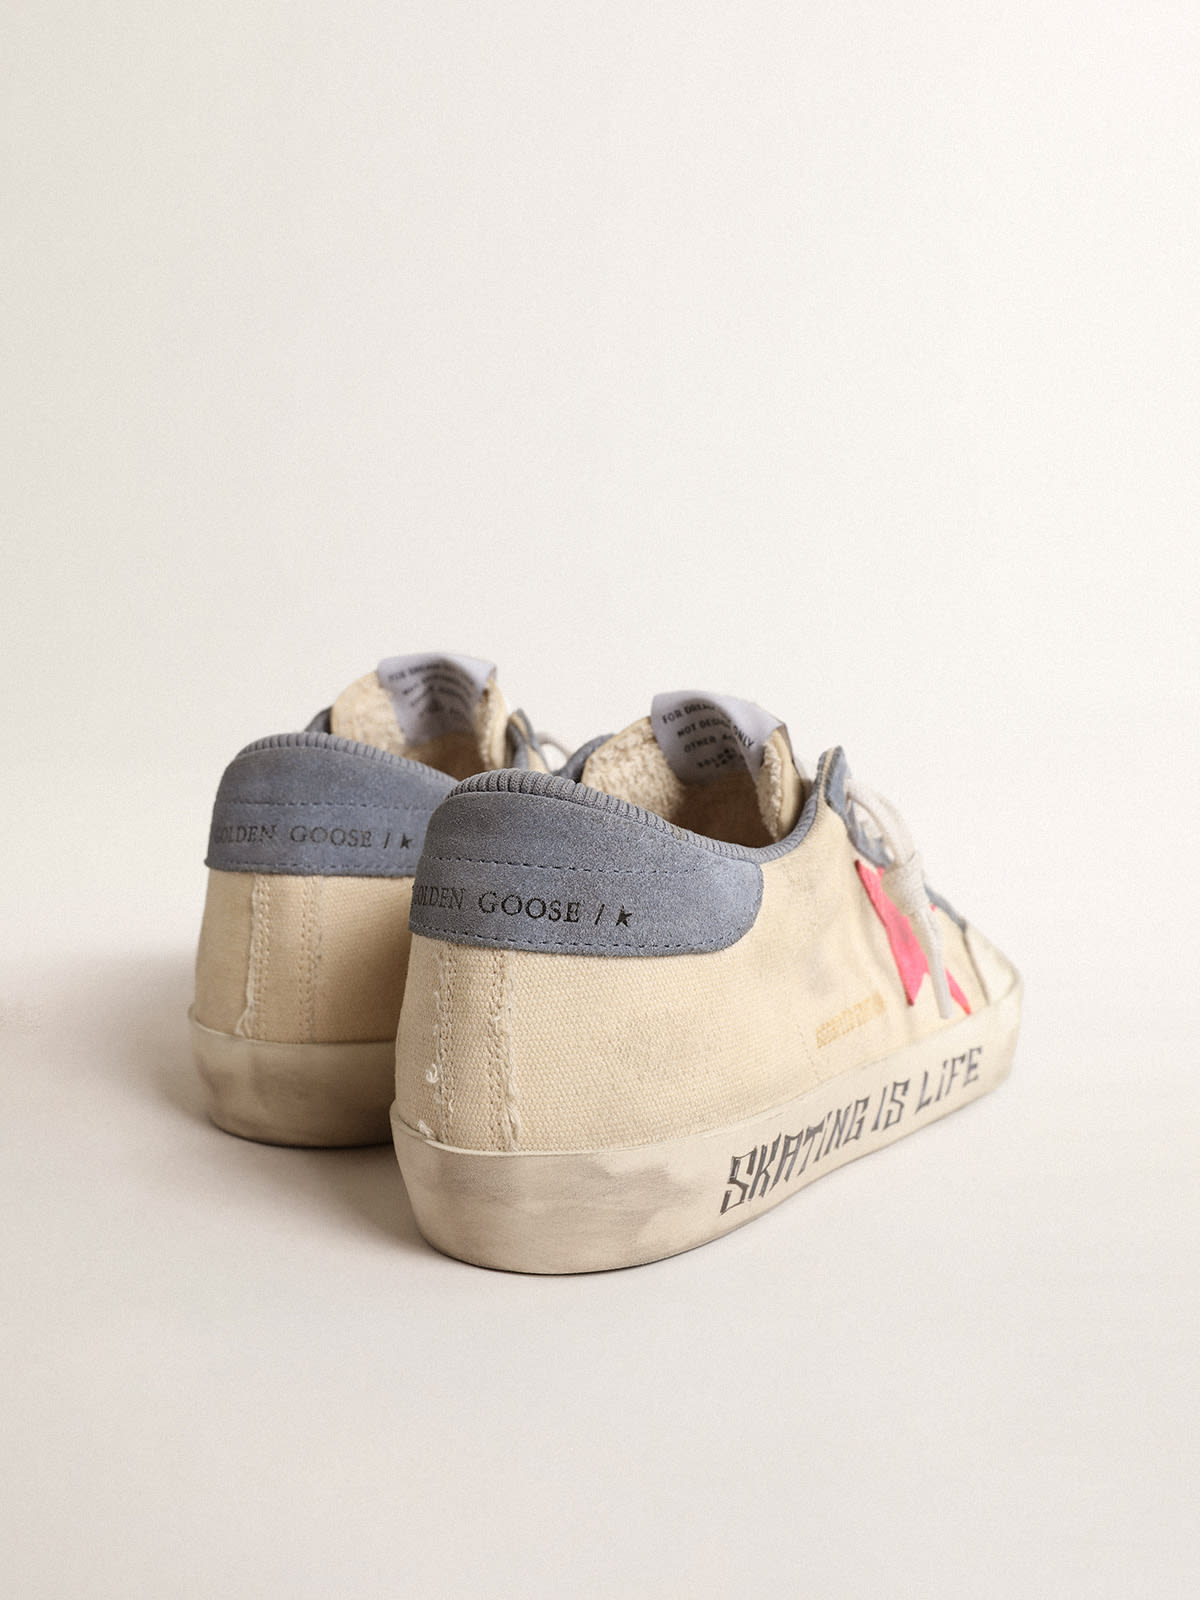 Golden Goose - Super-Star Penstar LTD in canvas with lobster-colored suede star in 